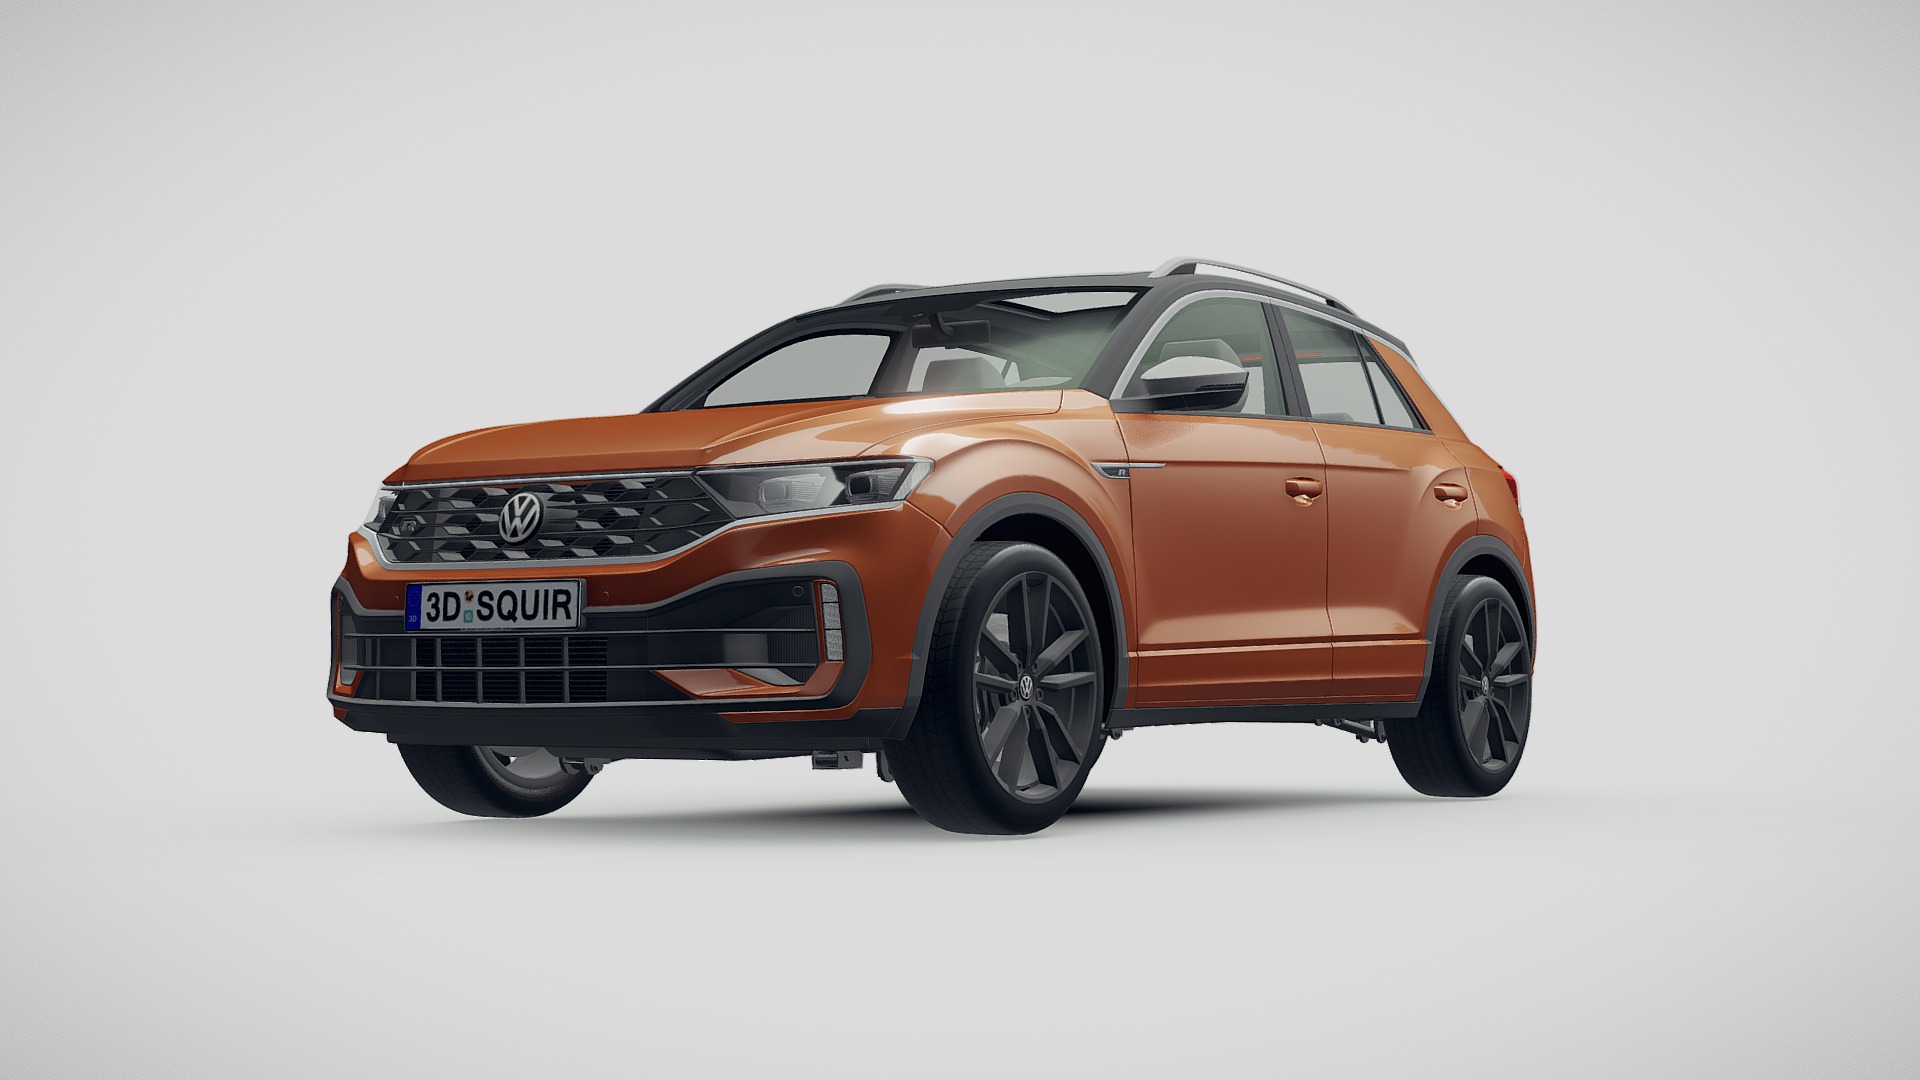 3D model Volkswagen T- Roc R 2020 - This is a 3D model of the Volkswagen T- Roc R 2020. The 3D model is about a car parked with its front facing the camera.